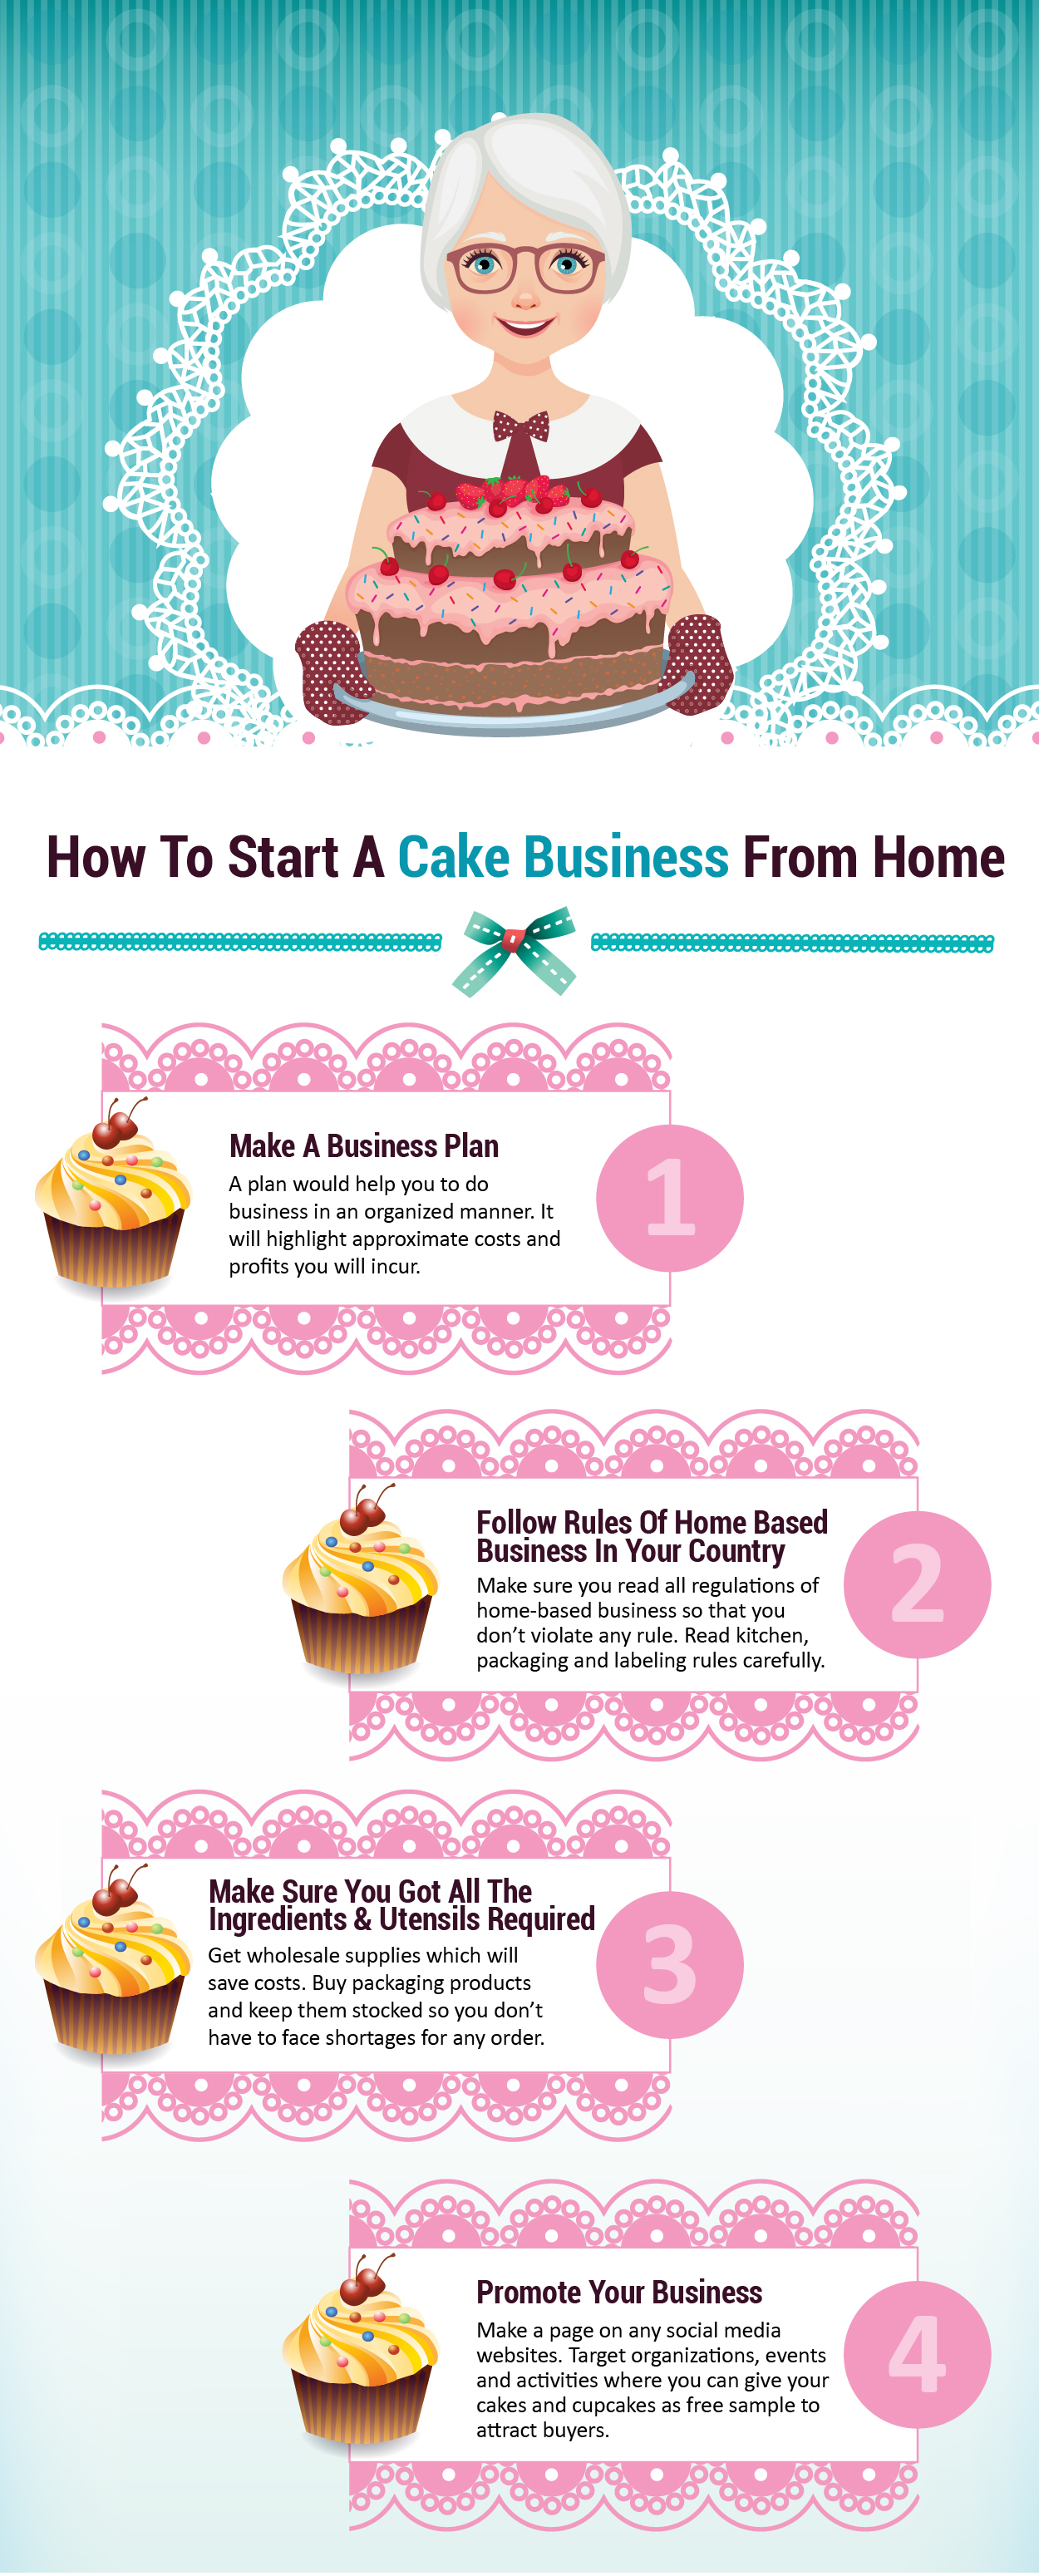 Being A Baker But Not Selling Your Cakes: My Business Model